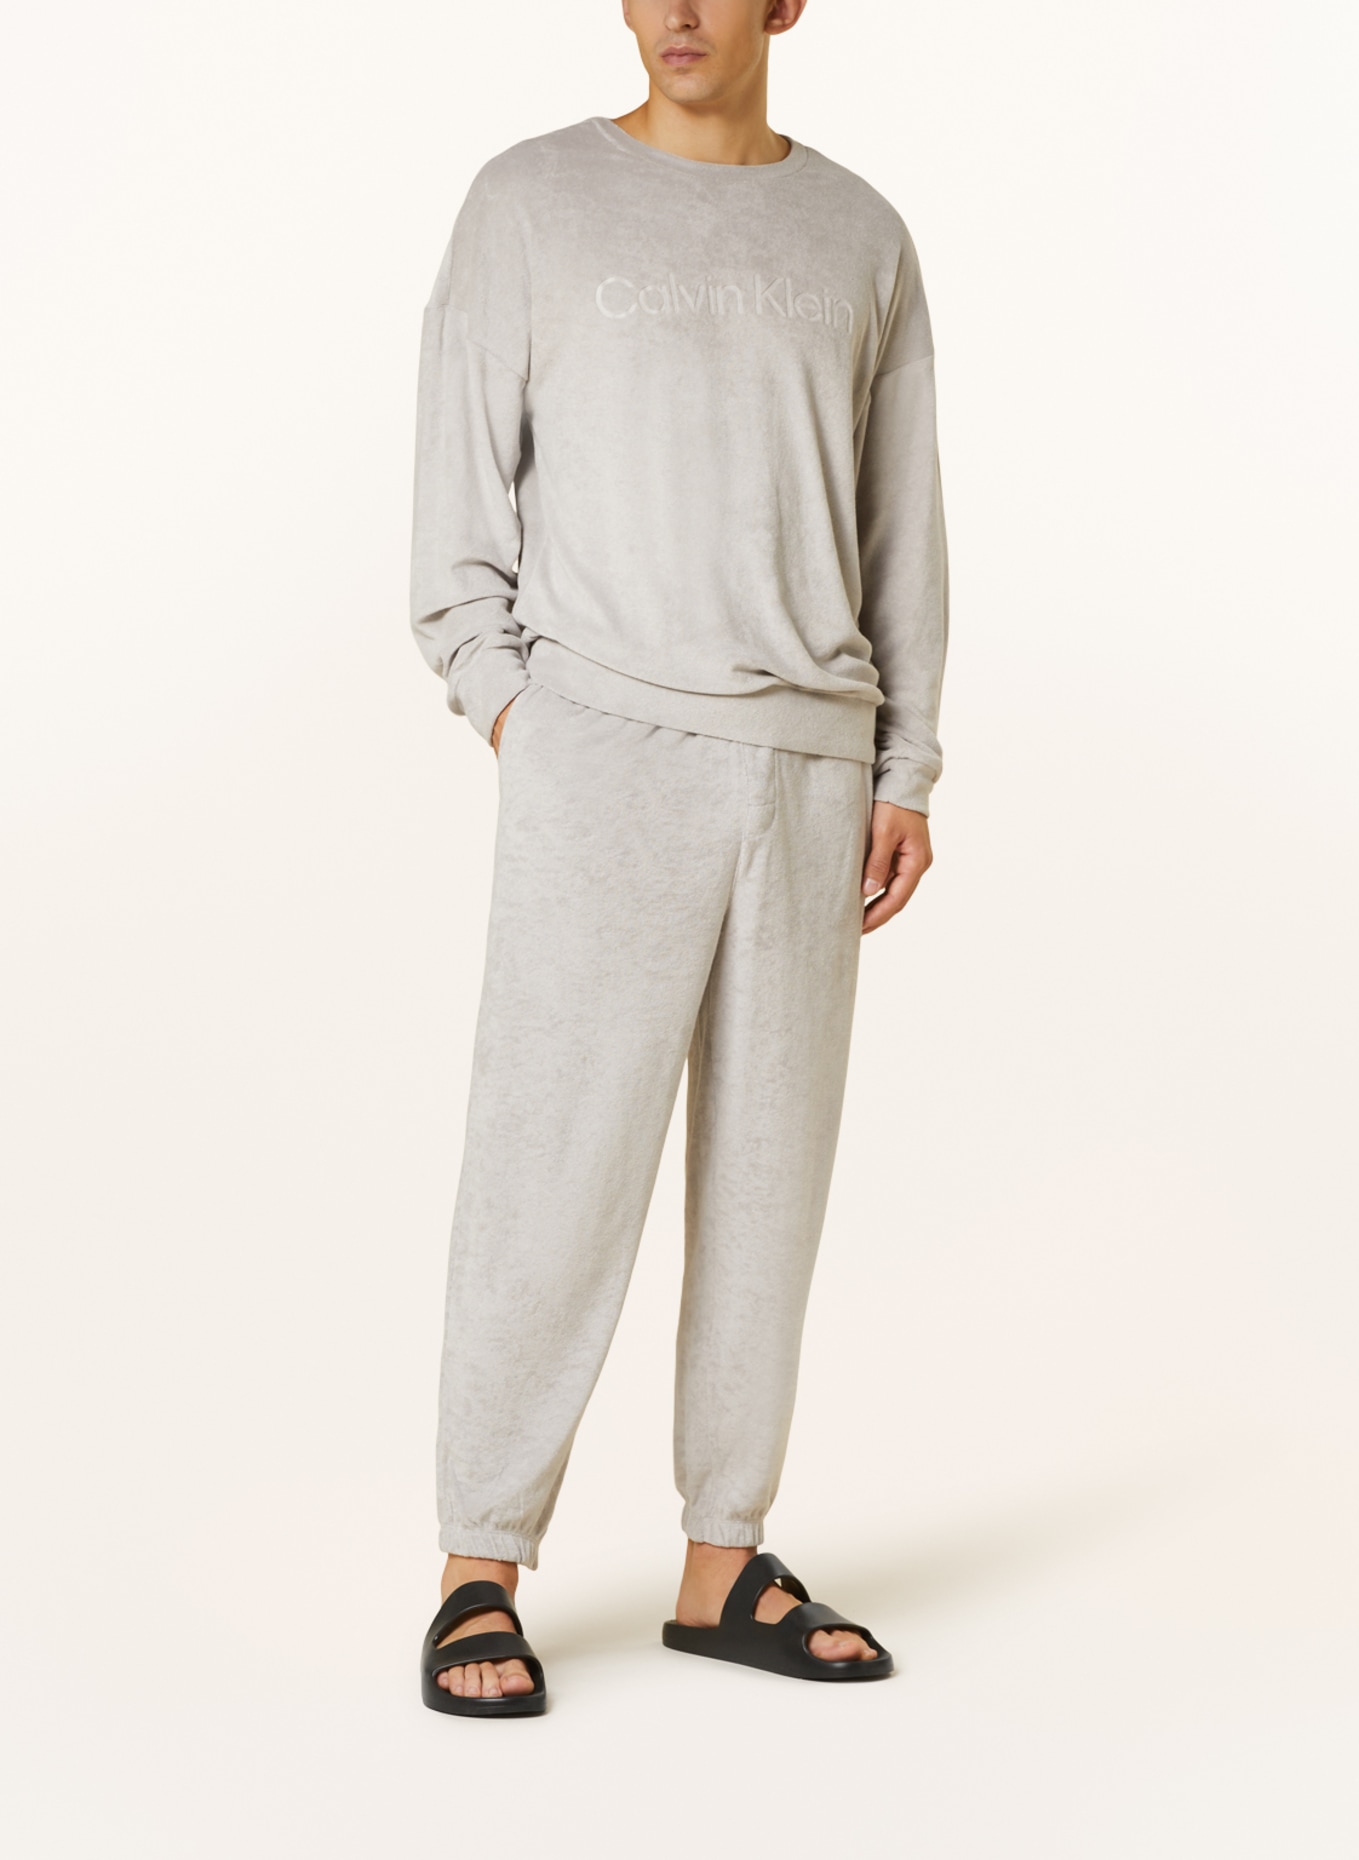 Calvin Klein Lounge pants made of terry cloth, Color: LIGHT GRAY (Image 2)